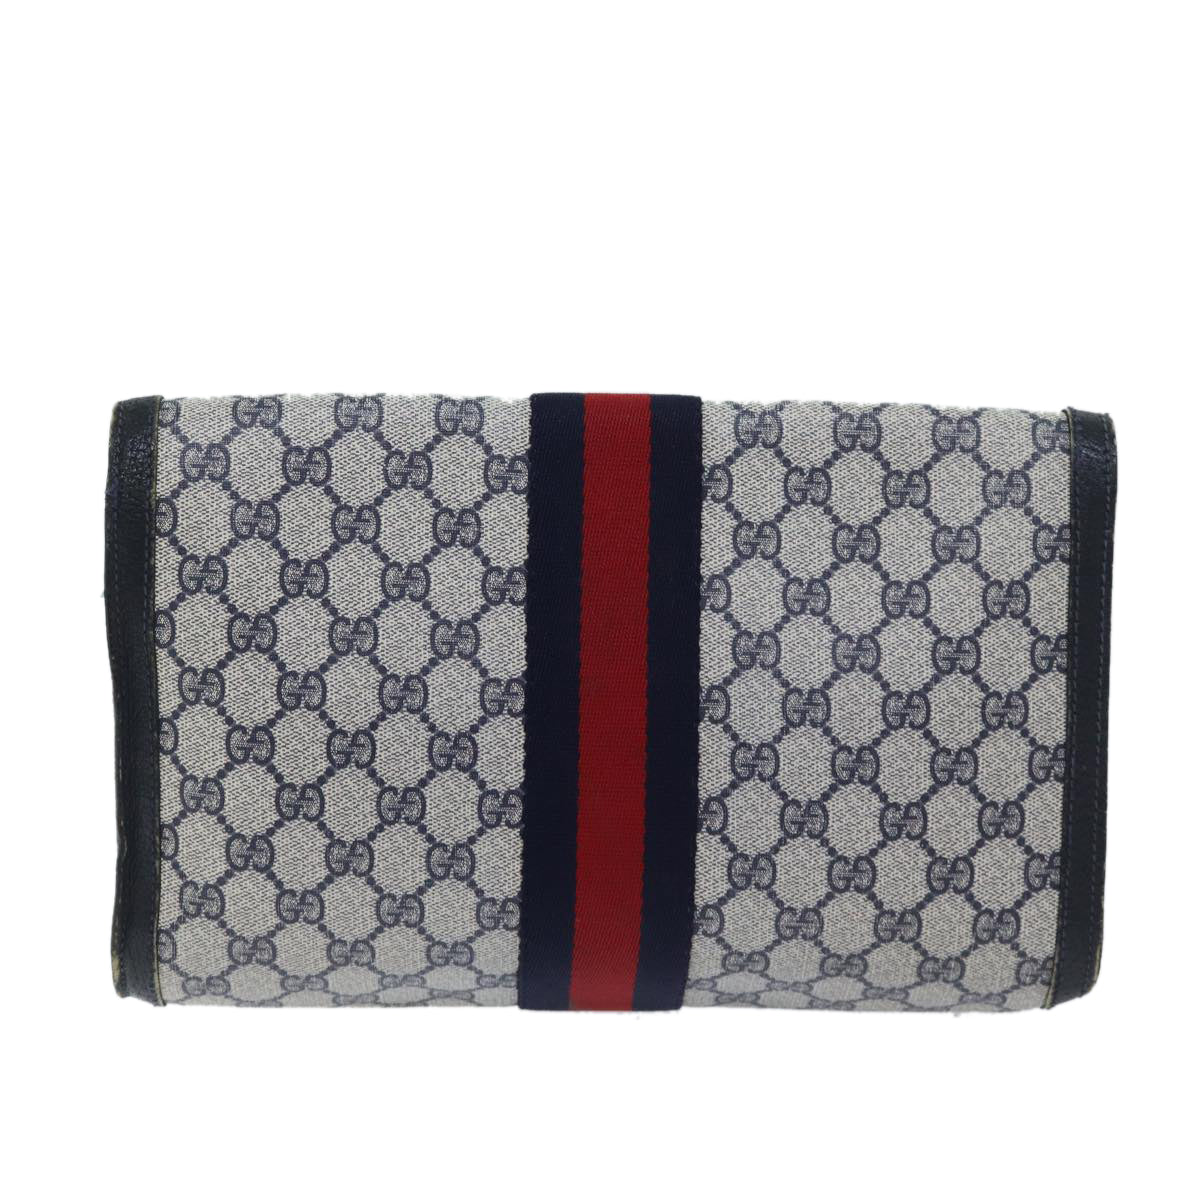 GUCCI GG Supreme Sherry Line Clutch Bag PVC Navy Red 89 01 007 Auth yk11471